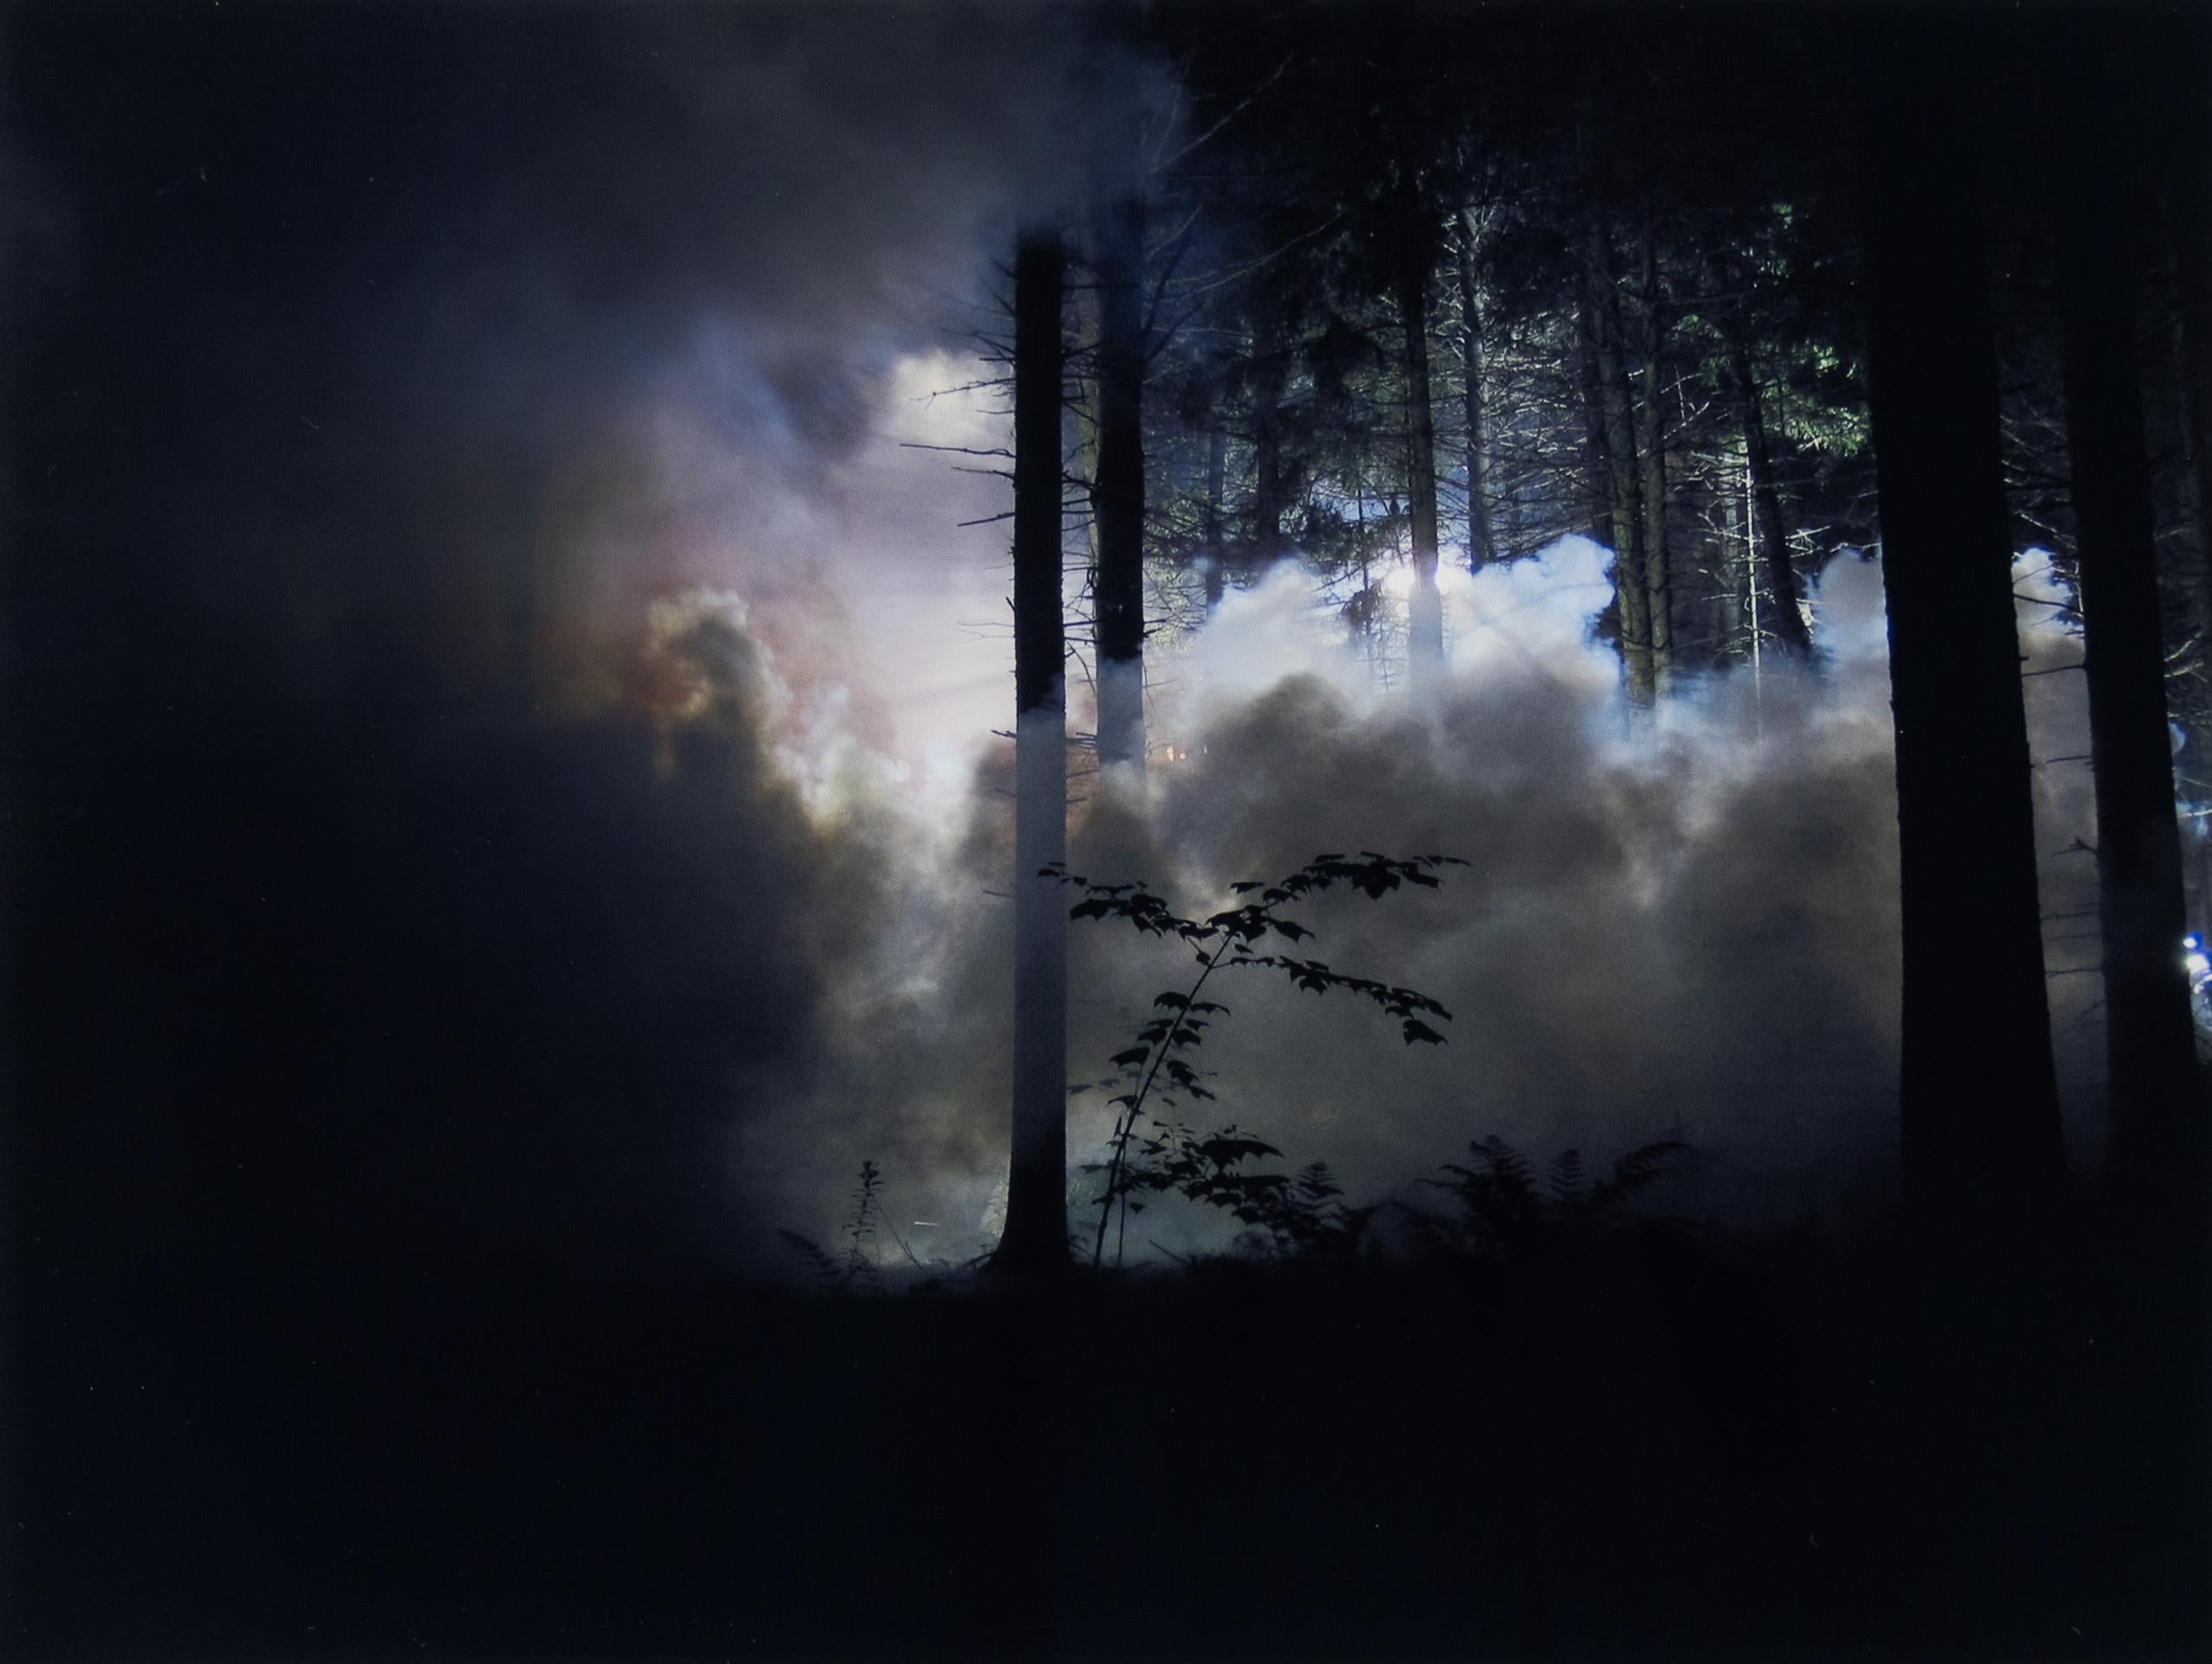 Gregory Crewdson Color Photograph - Production Still (Man in the Woods #3)